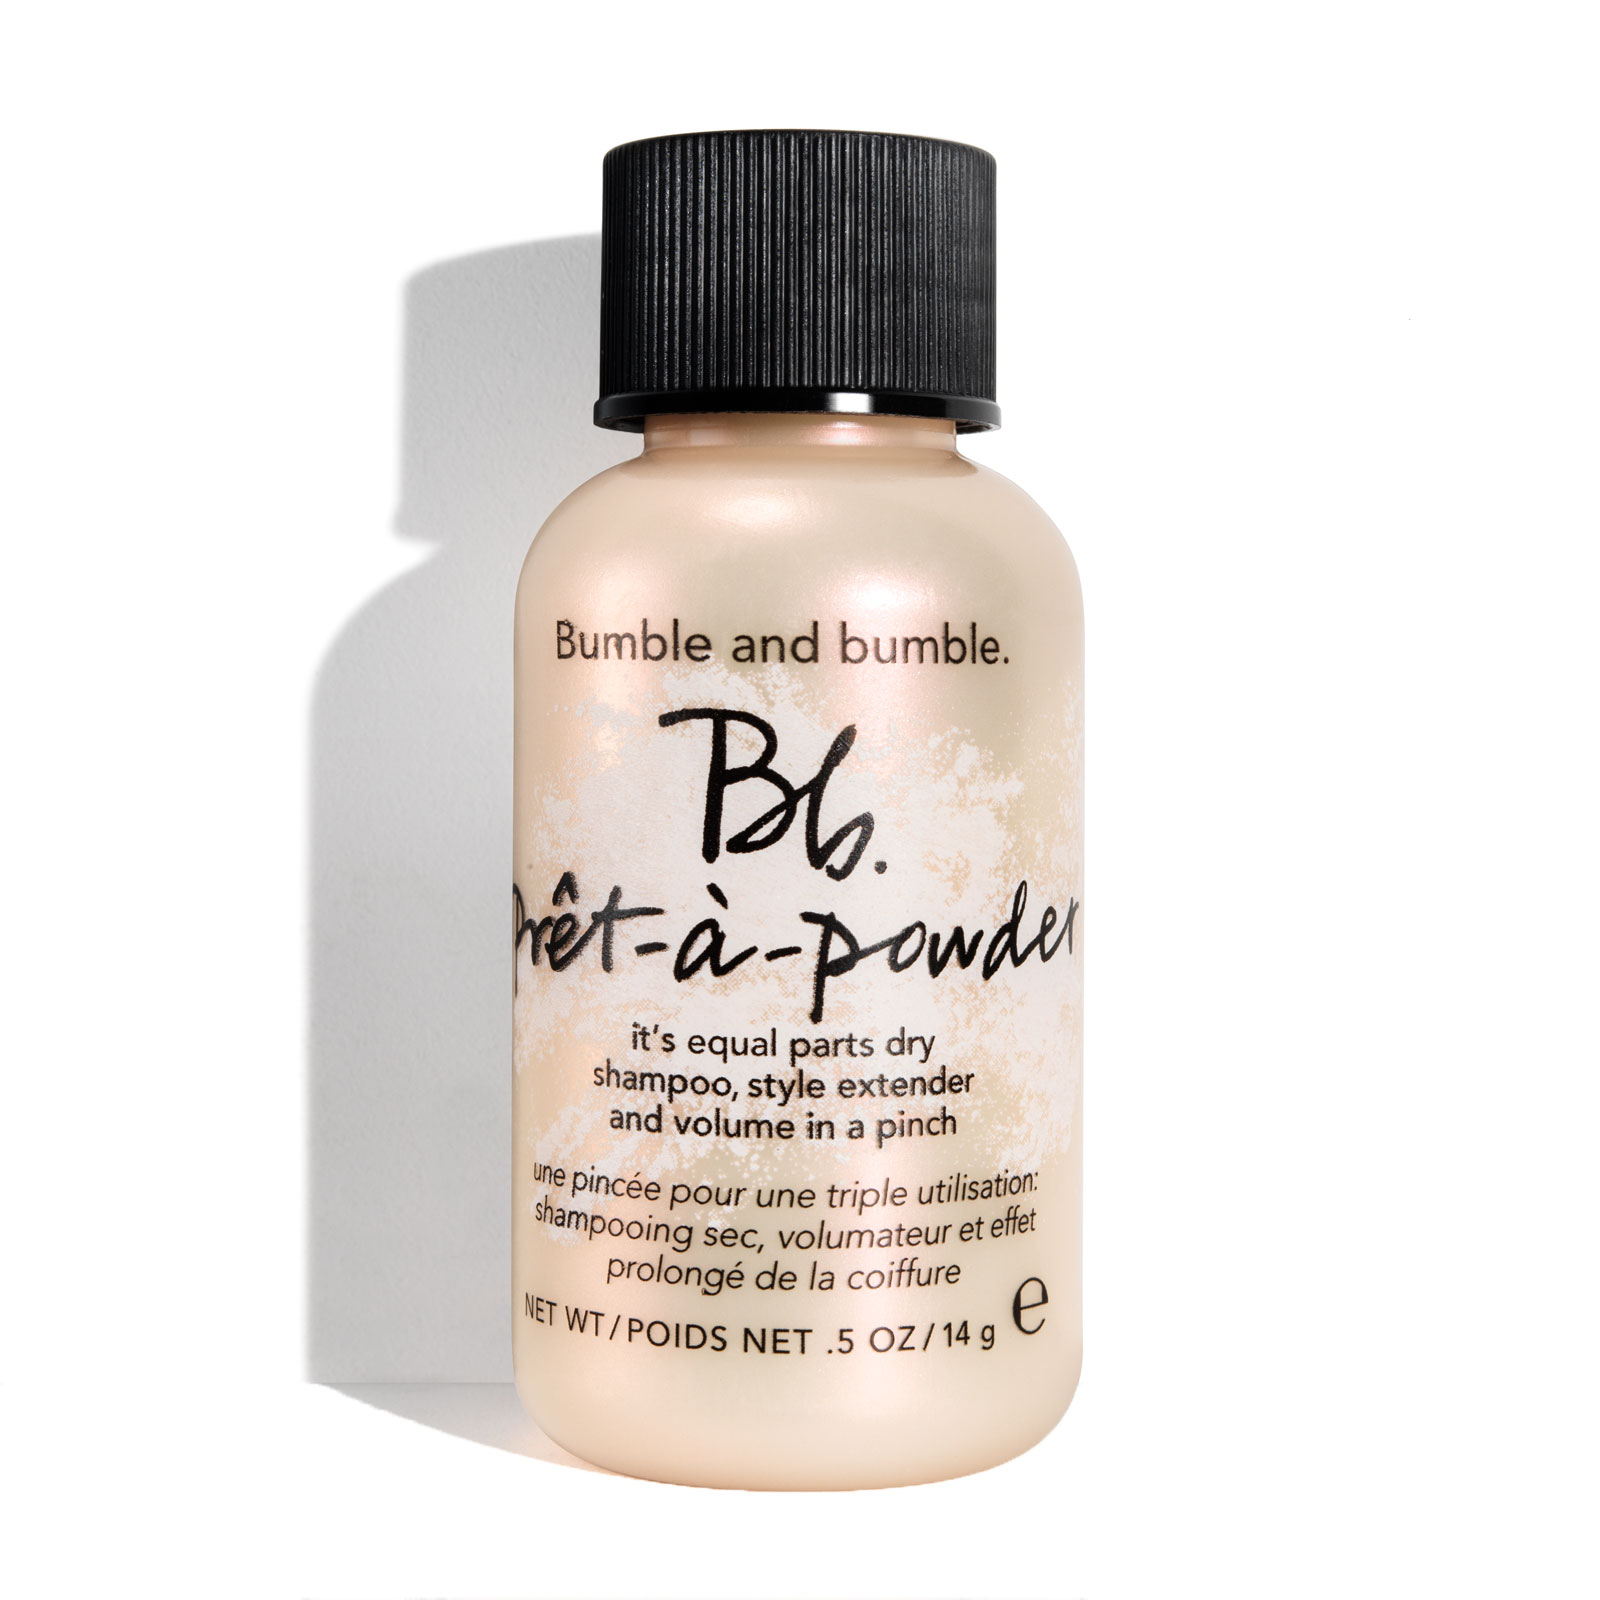 Bumble And Bumble Pret-A-Powder 14G